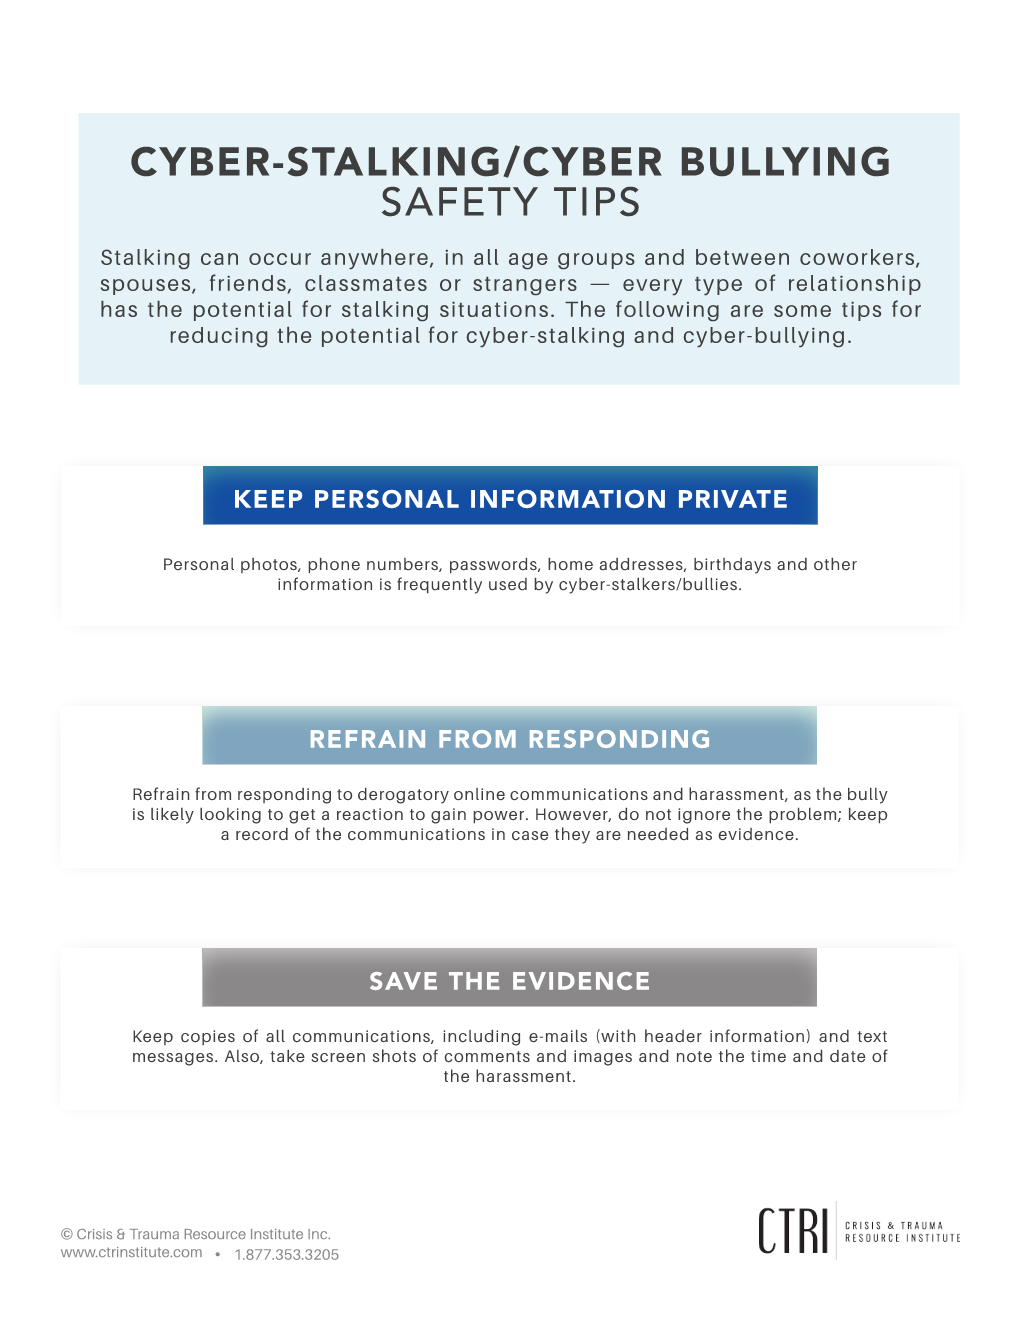 Cyber-Stalking/Cyber Bullying Safety Tips